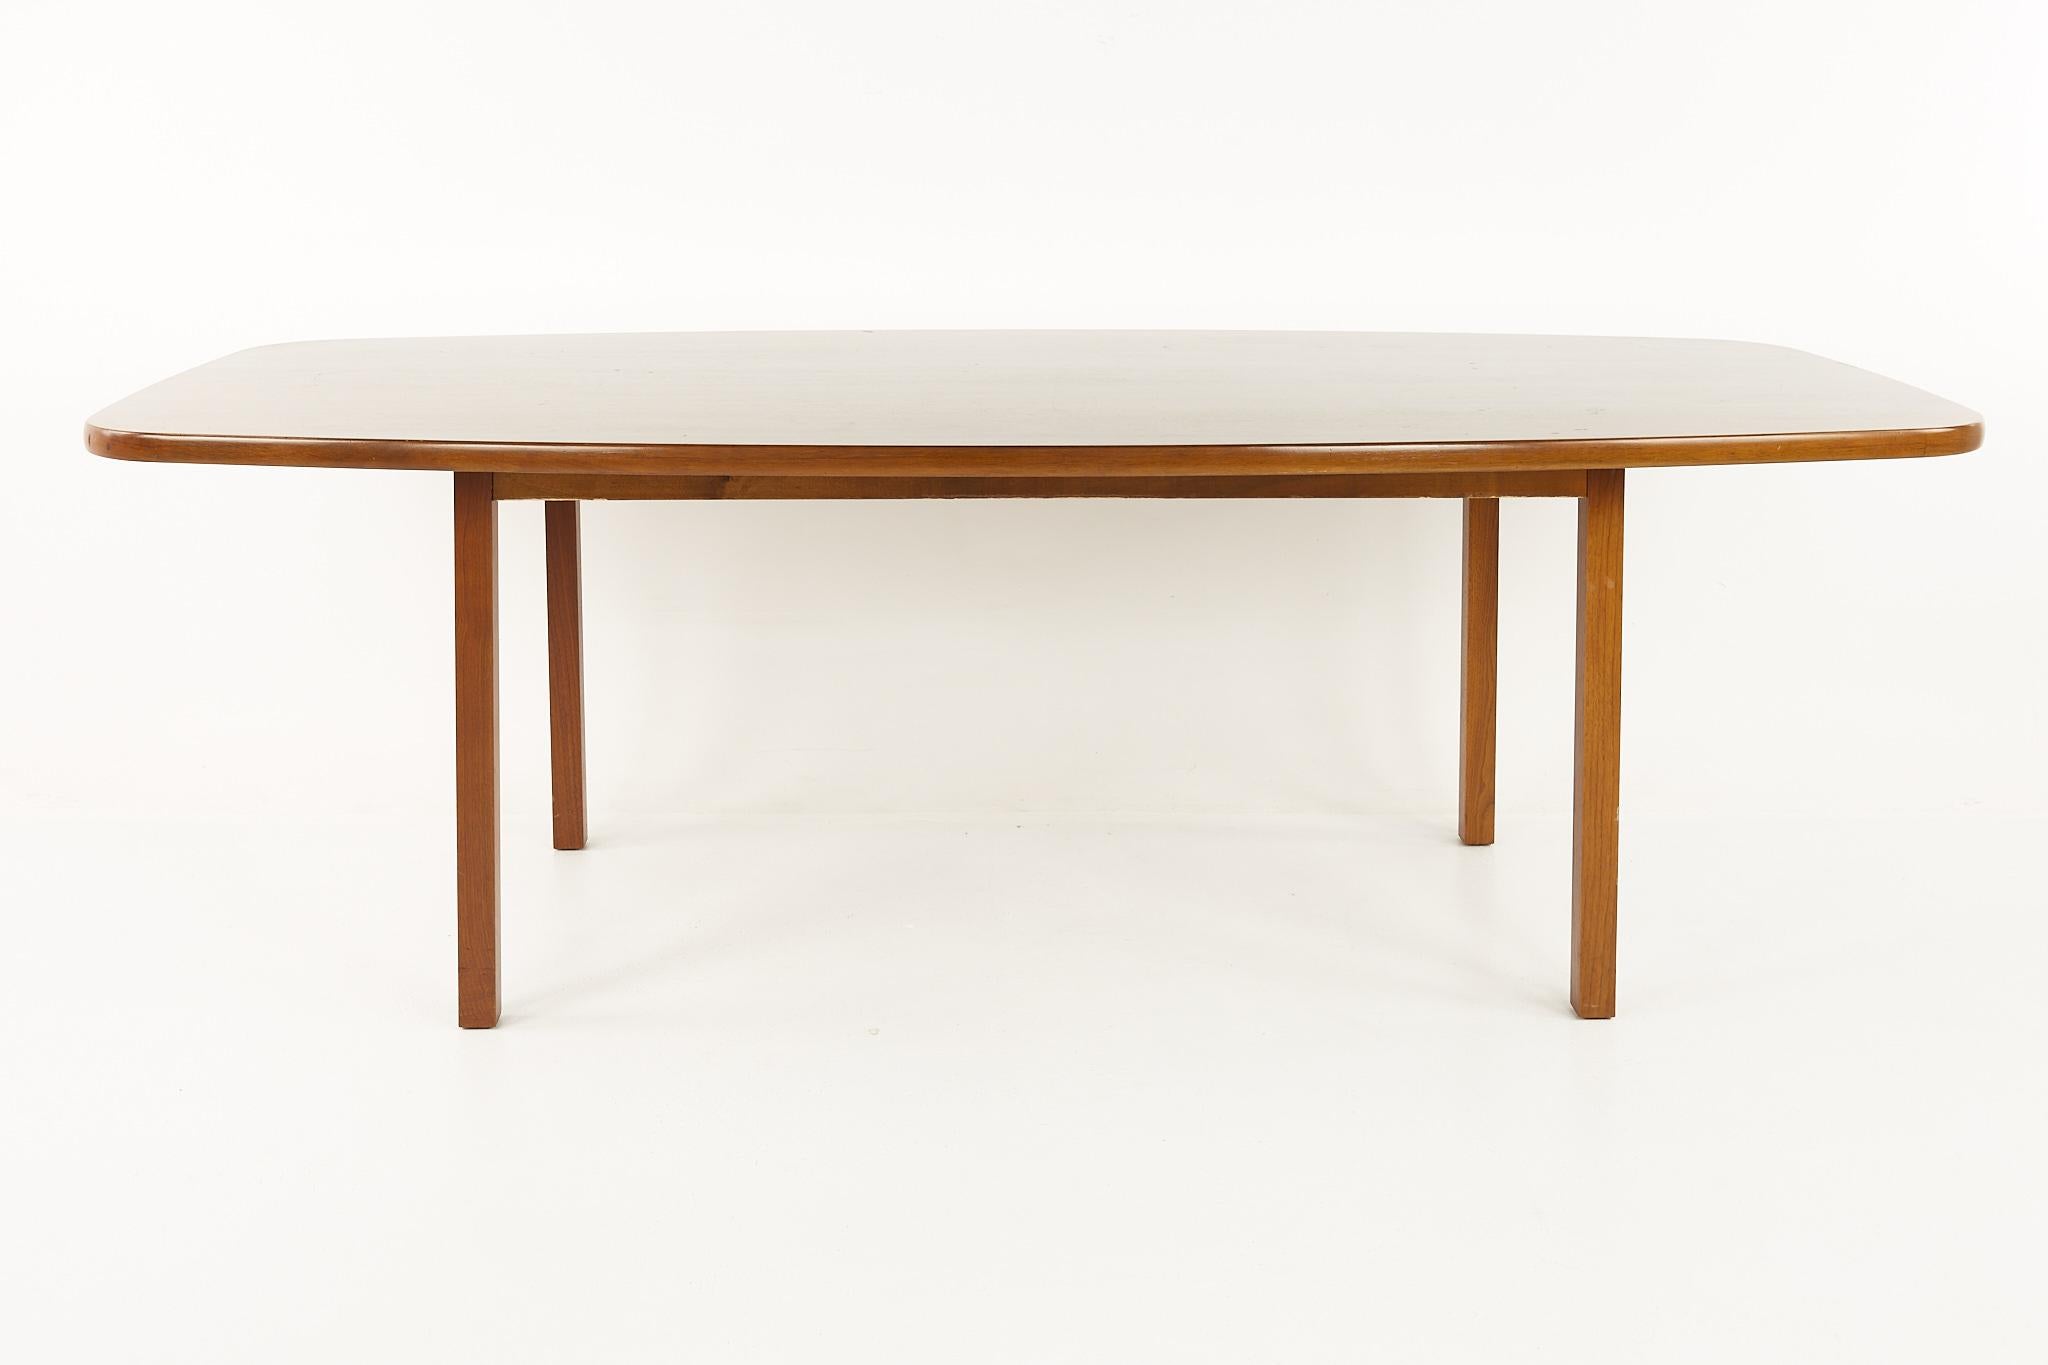 Edward Wormley for Dunbar mid century conference table

This table measures: 90 wide x 42 deep x 29 inches high, with a chair clearance of 29.5 inches

All pieces of furniture can be had in what we call restored vintage condition. That means the